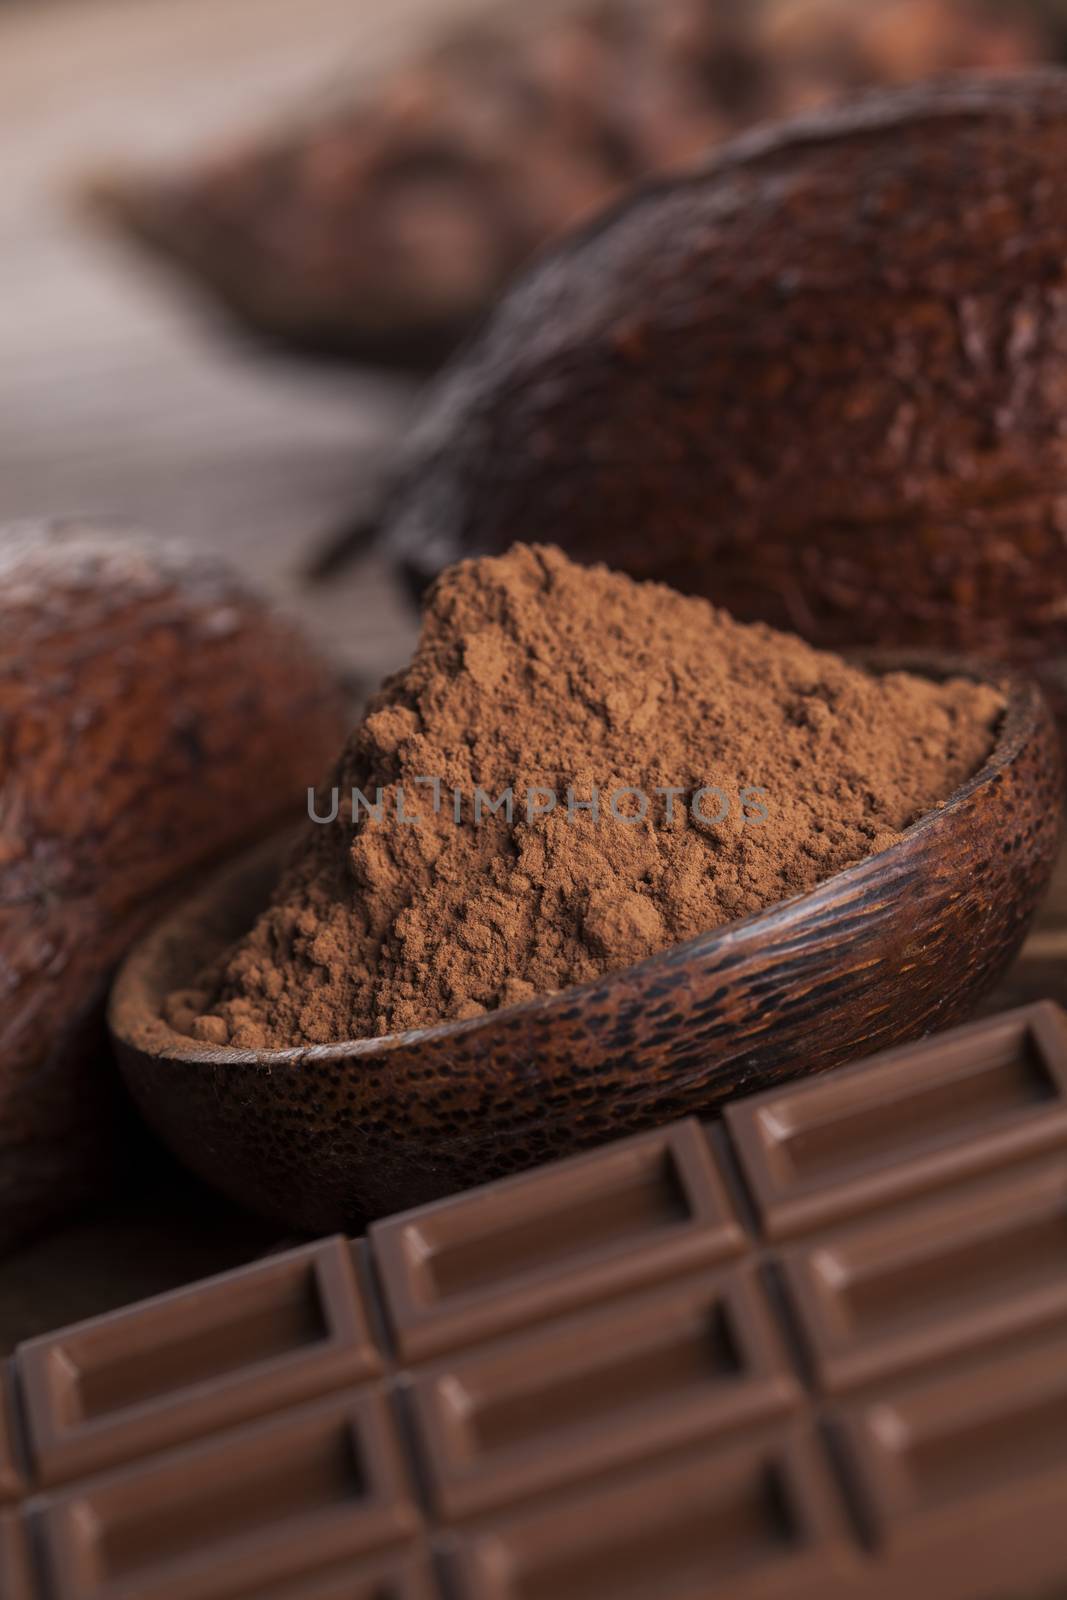 Cocoa pod and chocolate bar and food dessert background by JanPietruszka